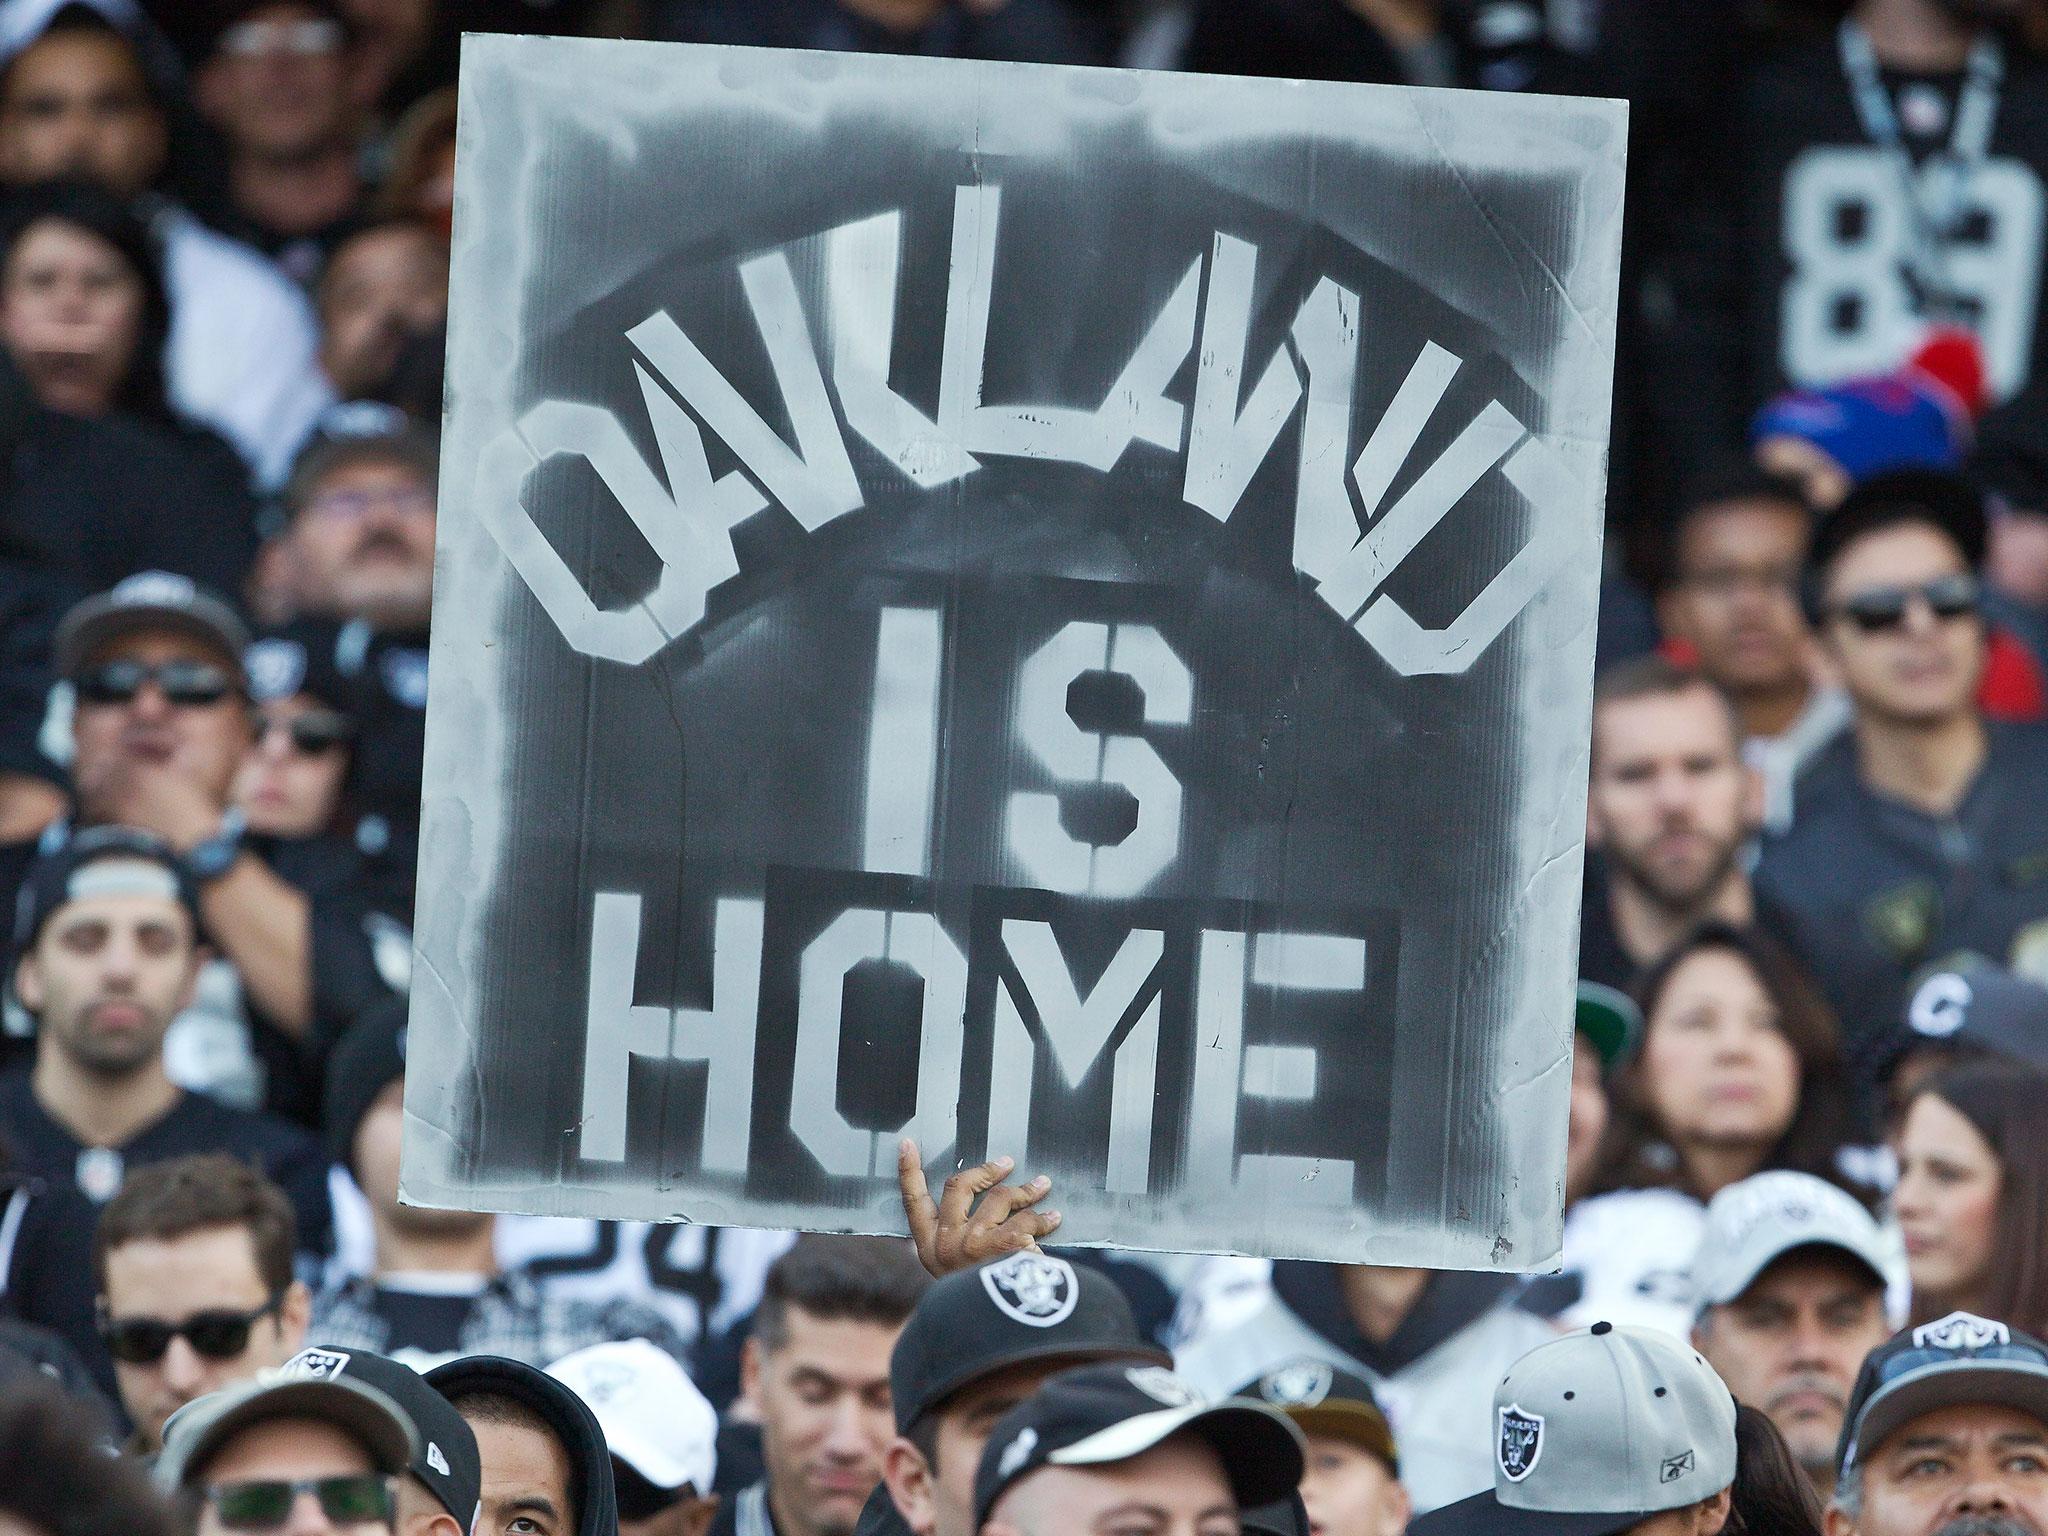 Many Oakland fans have been vocal in their opposition to the move to Las Vegas